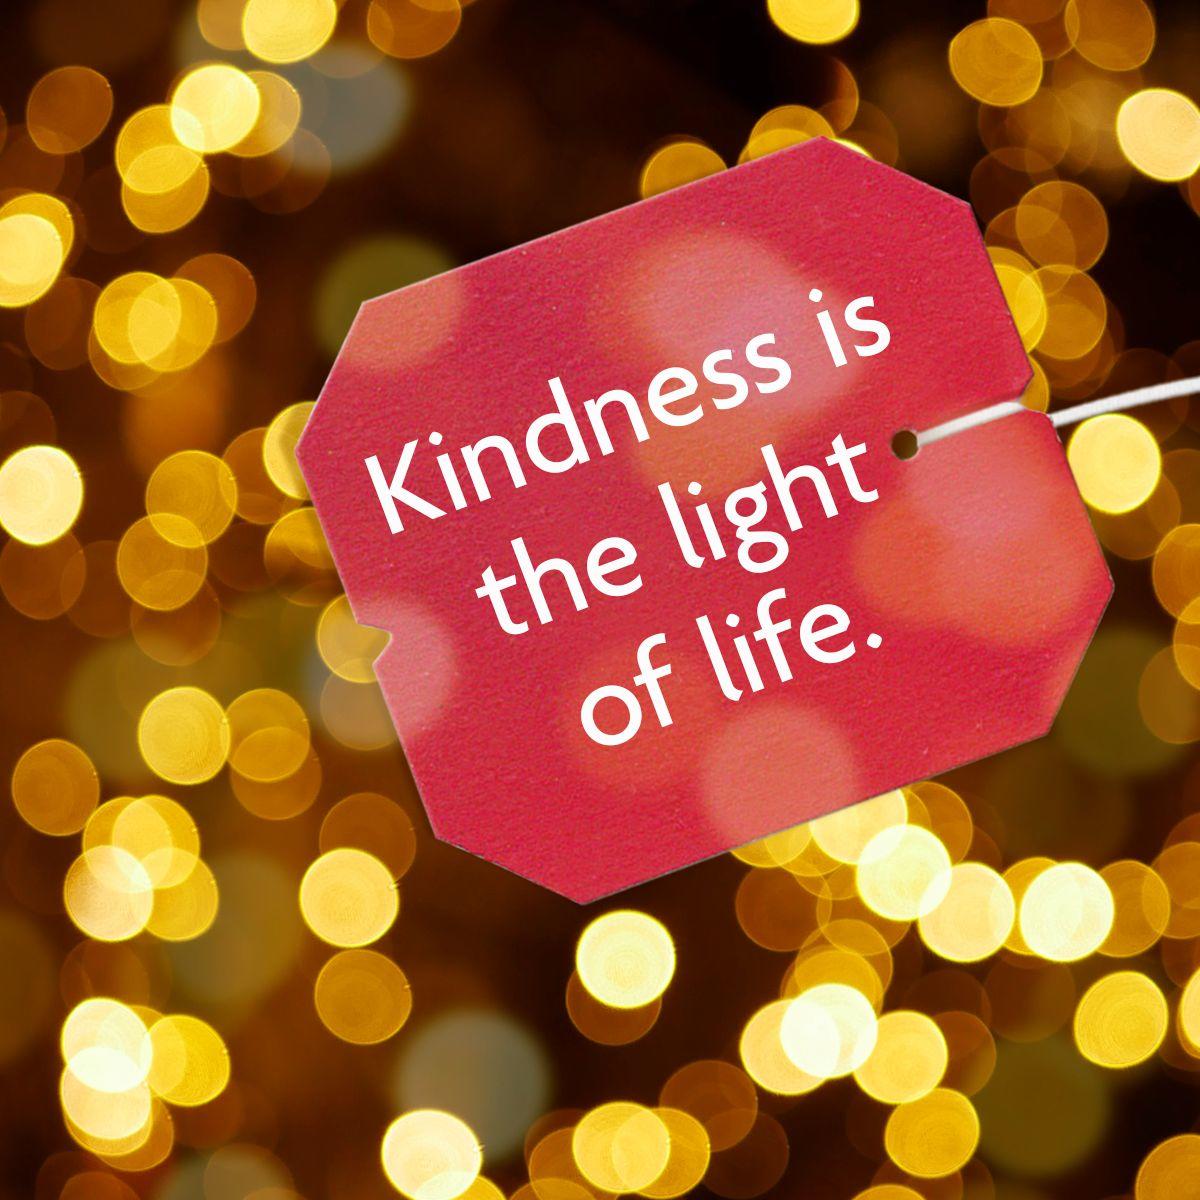 Kindness is the light of life! We hope you had a great #WorldKindnessDay